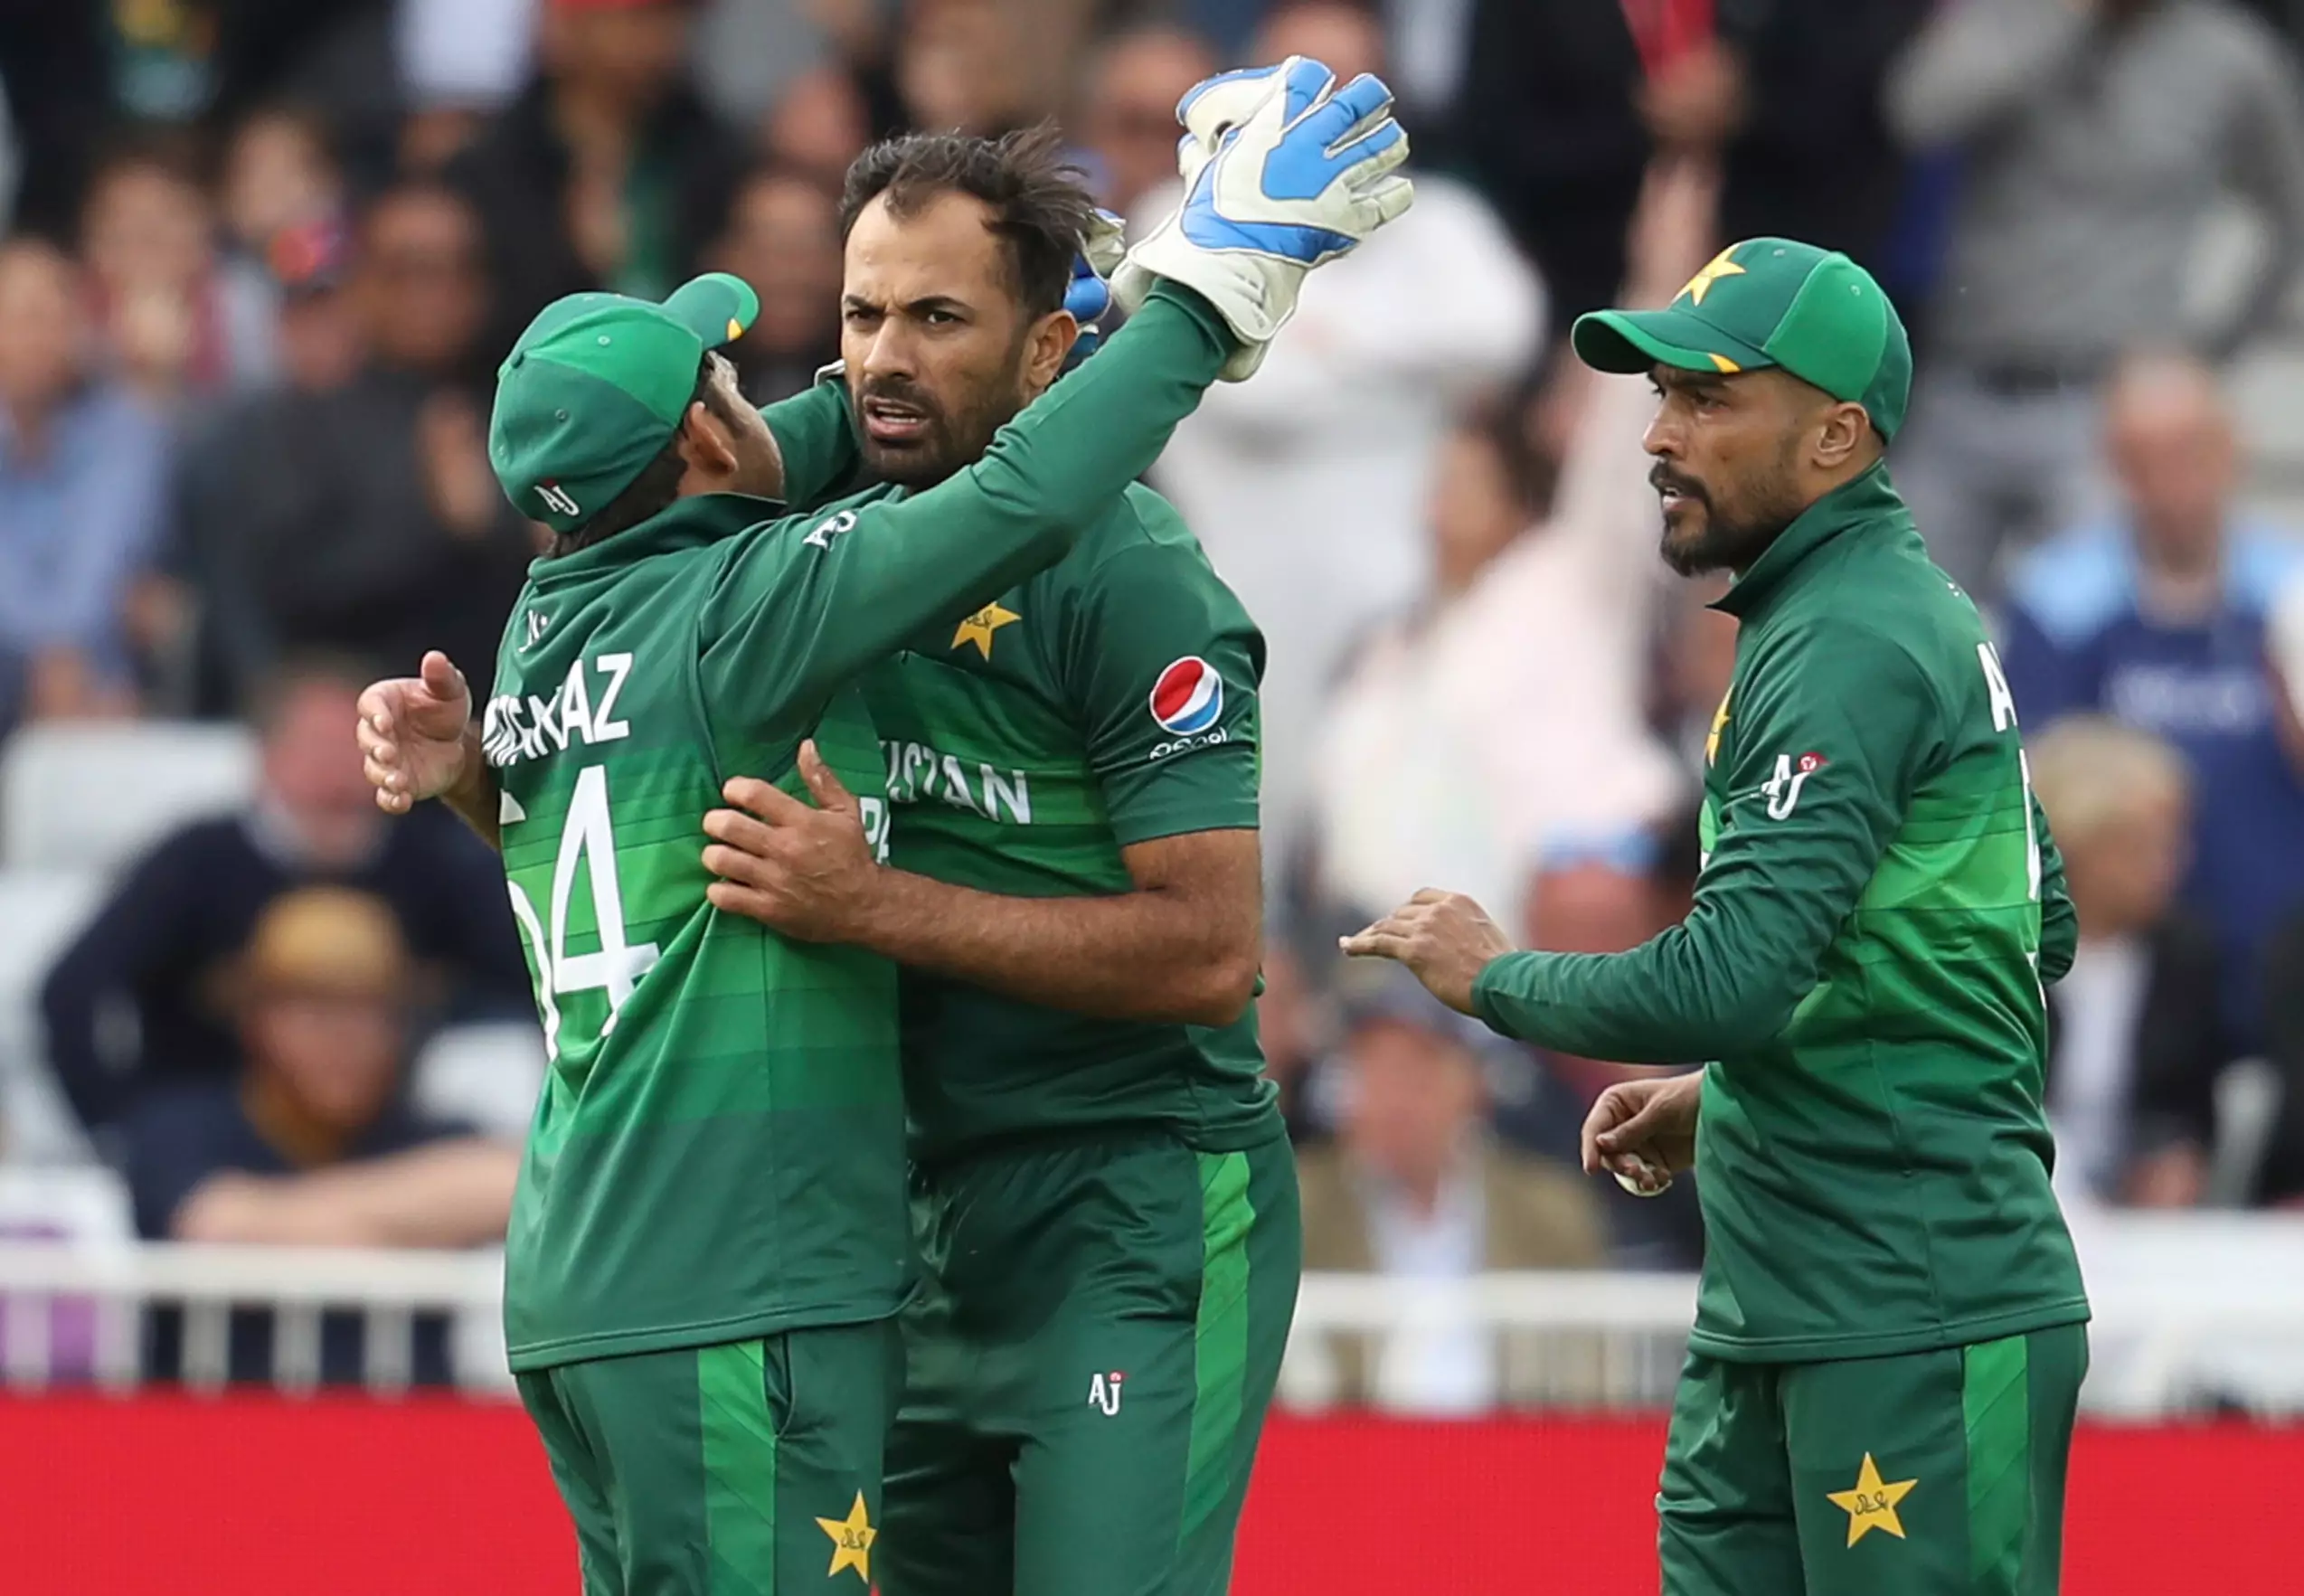 Pakistan vs Sri Lanka: Live Streaming And TV channel Info For Cricket World Cup Clash